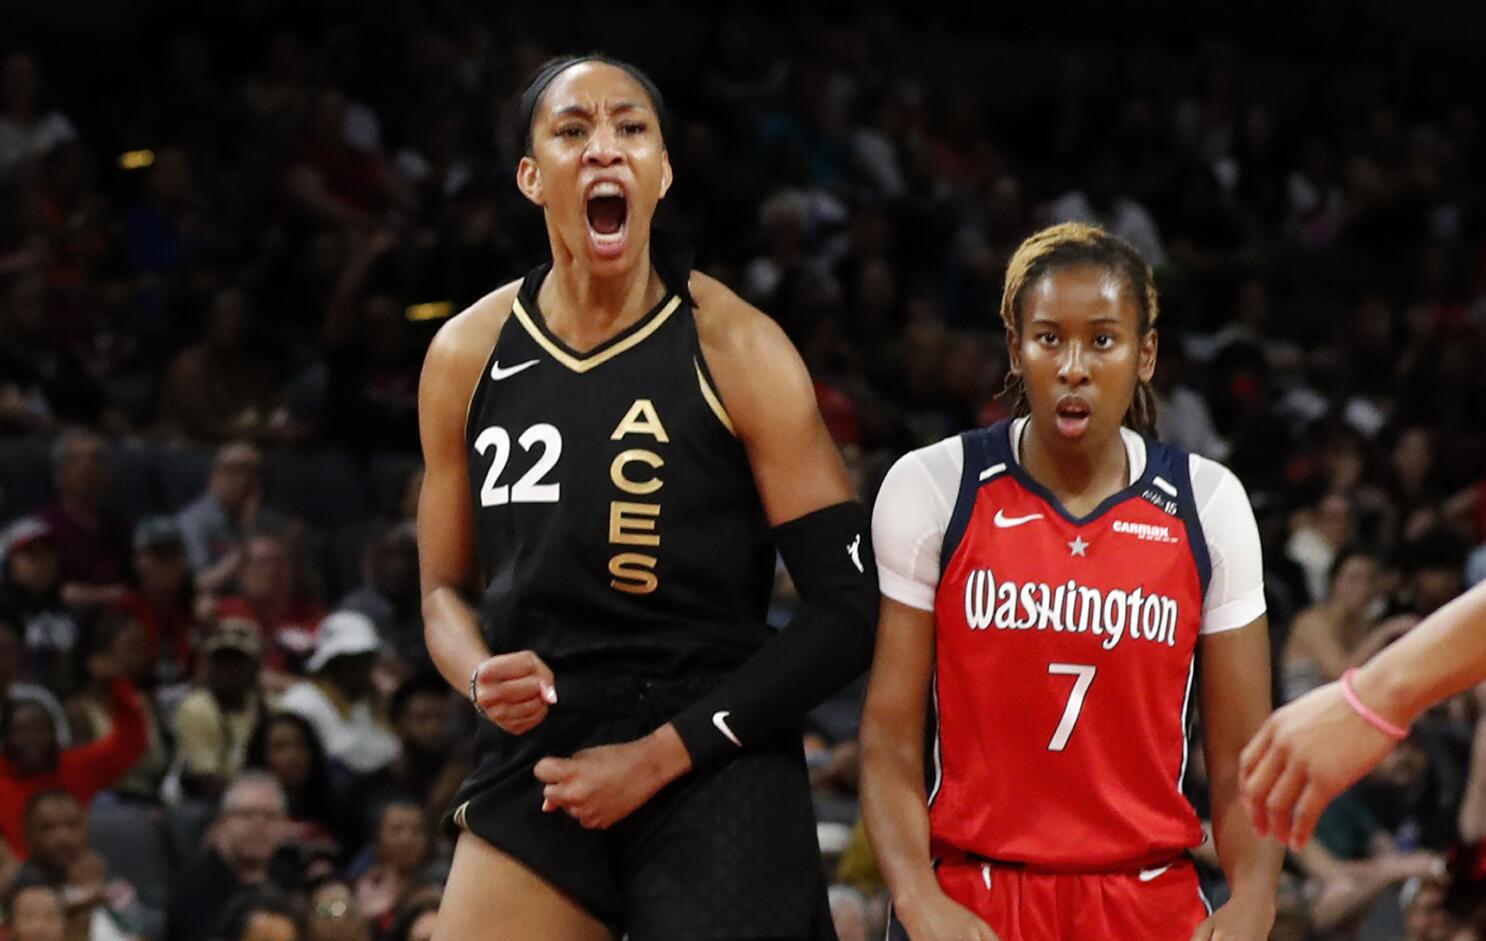 Cooper has career-high 26 points, Sparks beat Mystics 89-82 - WTOP News